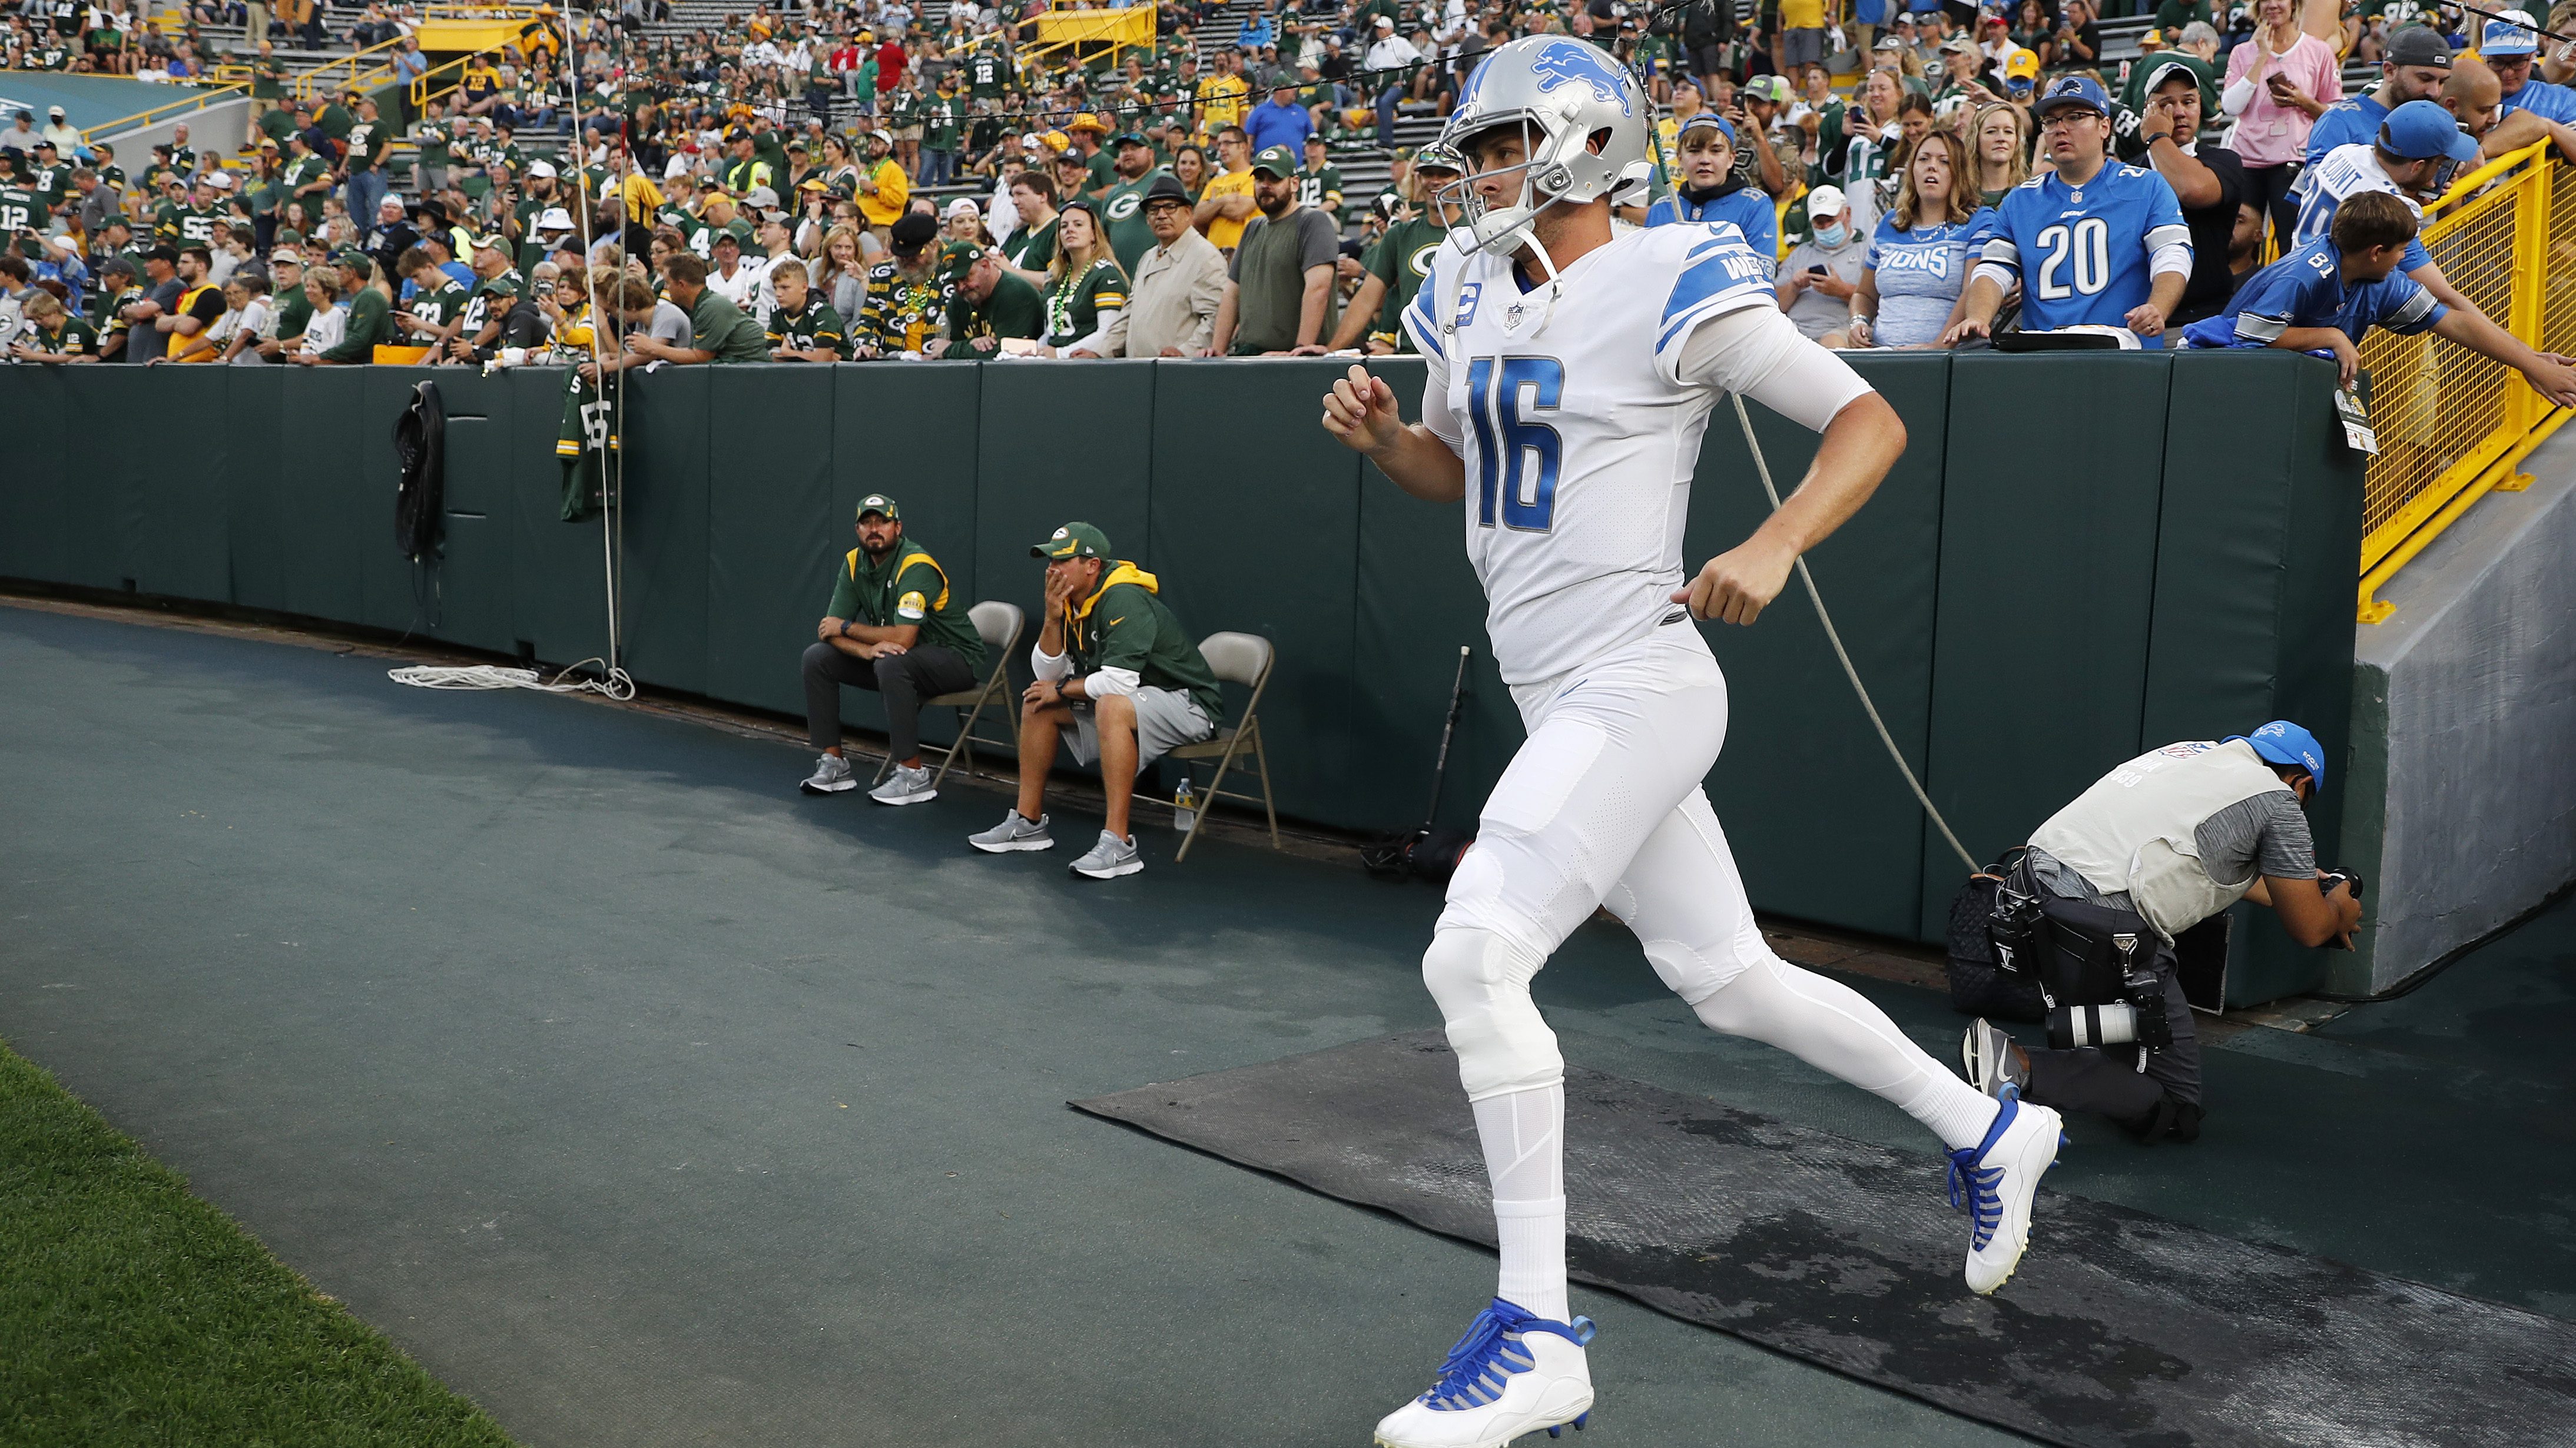 Lions will wear all-white uniforms vs. Giants